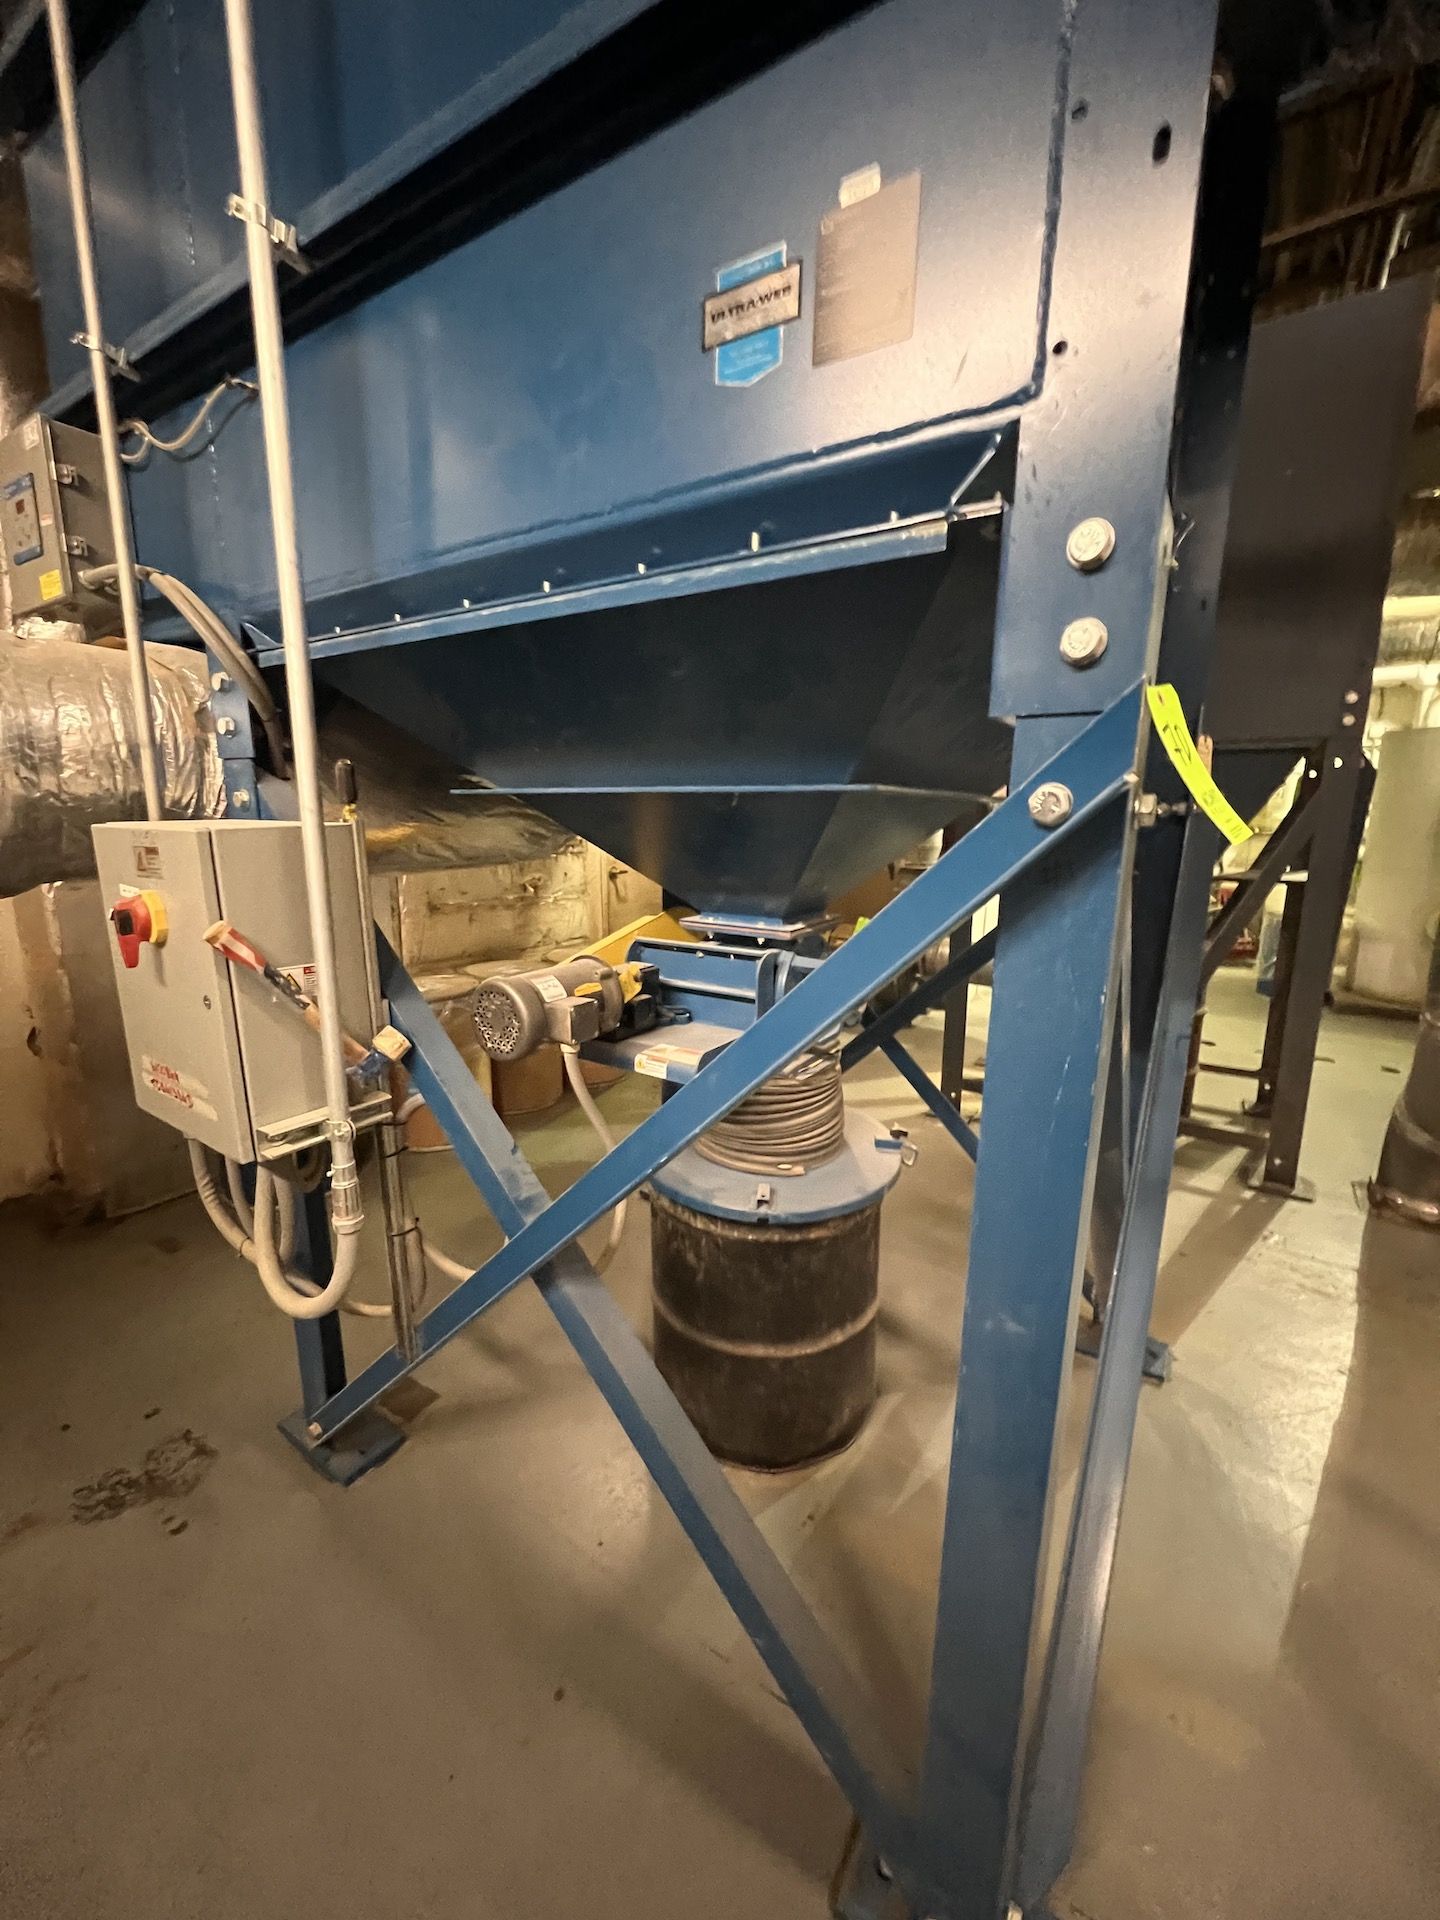 DONALDSON TORIT DUST COLLECTOR BAG HOUSE, MODEL DFT2-12, S/N 14893410-L1-1, PRODUCT NAME DOWNFLO - Image 5 of 23